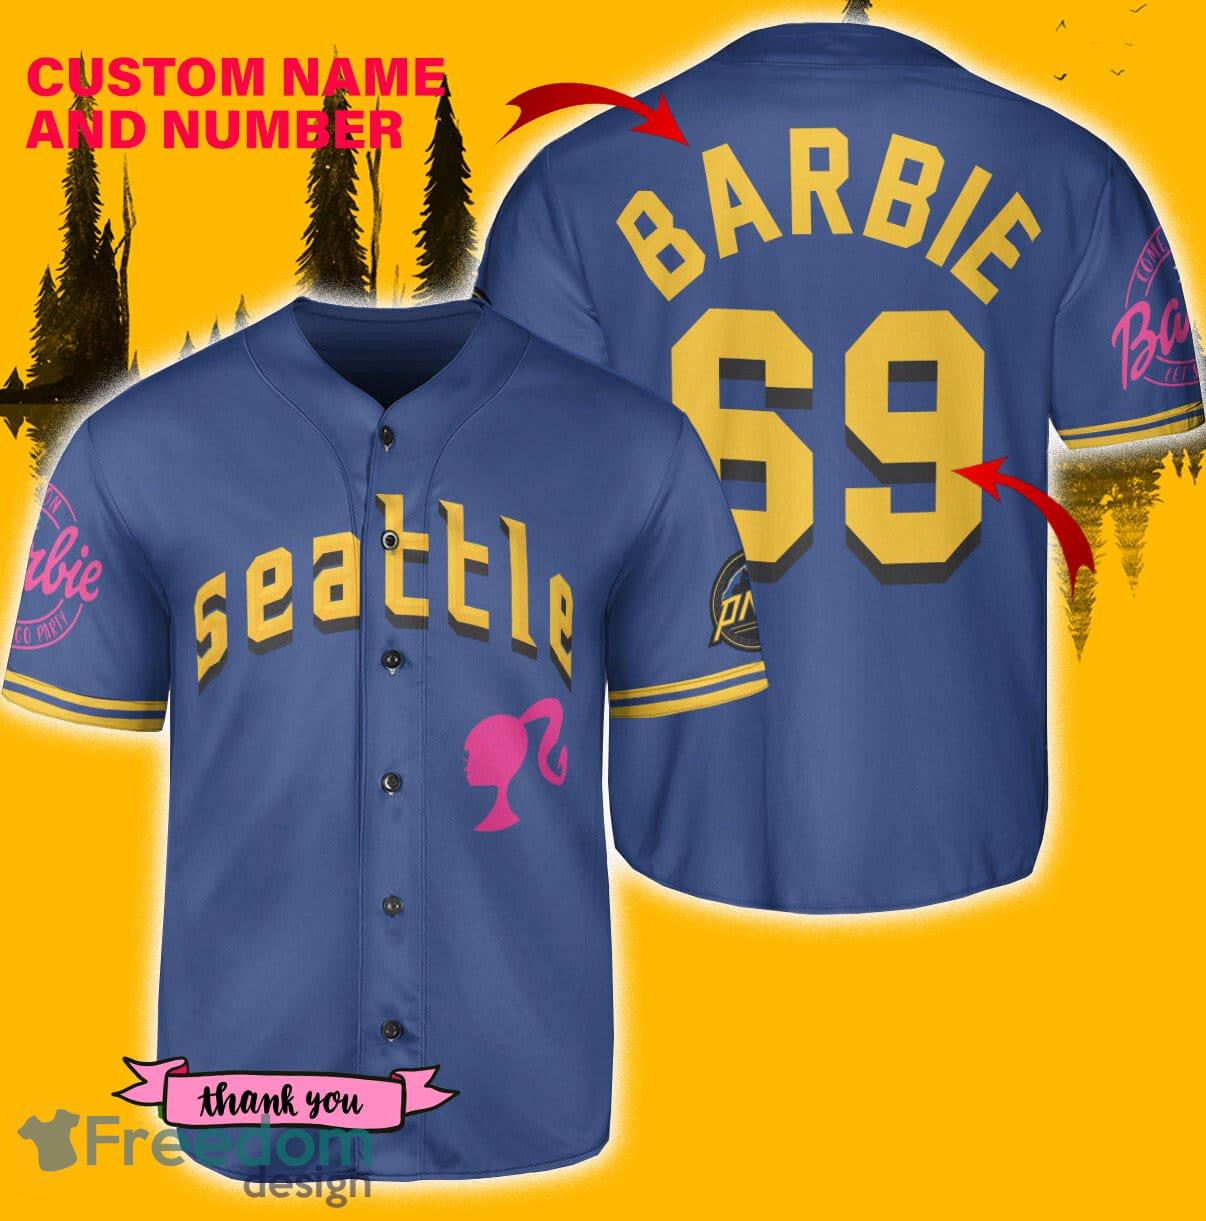 Seattle Mariners MLB Baseball Jersey Shirt Custom Name And Number For Fans